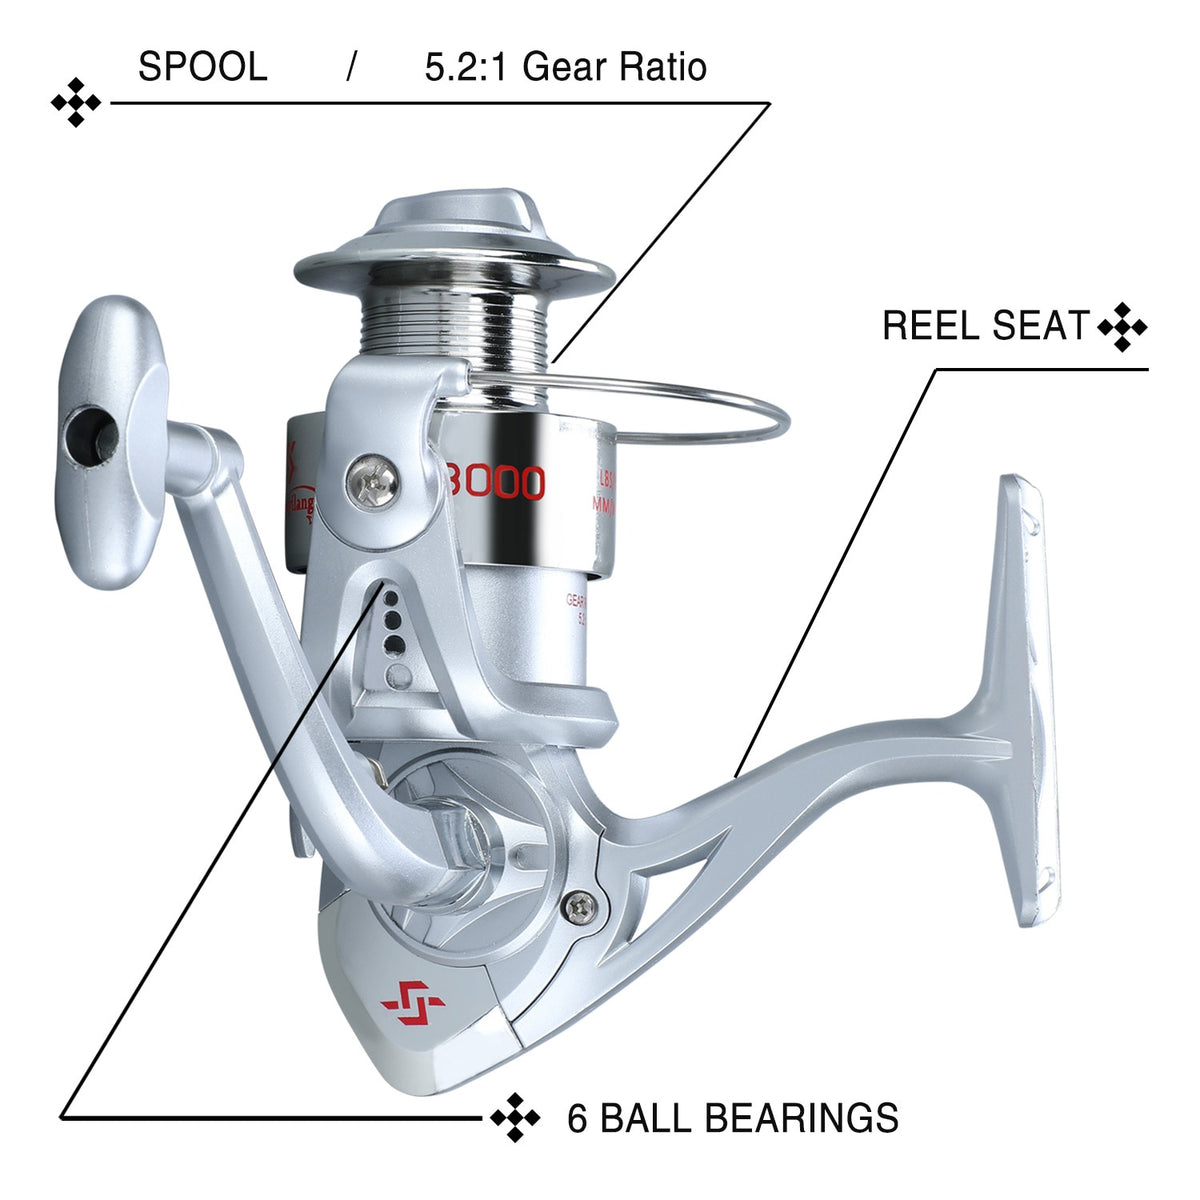 Sougayilang 2000 3000 Series White 11+1BB Spinning Reel, 5.2:1 Gear Ratio  Fishing Reel With Aluminum Spool For Freshwater Saltwater